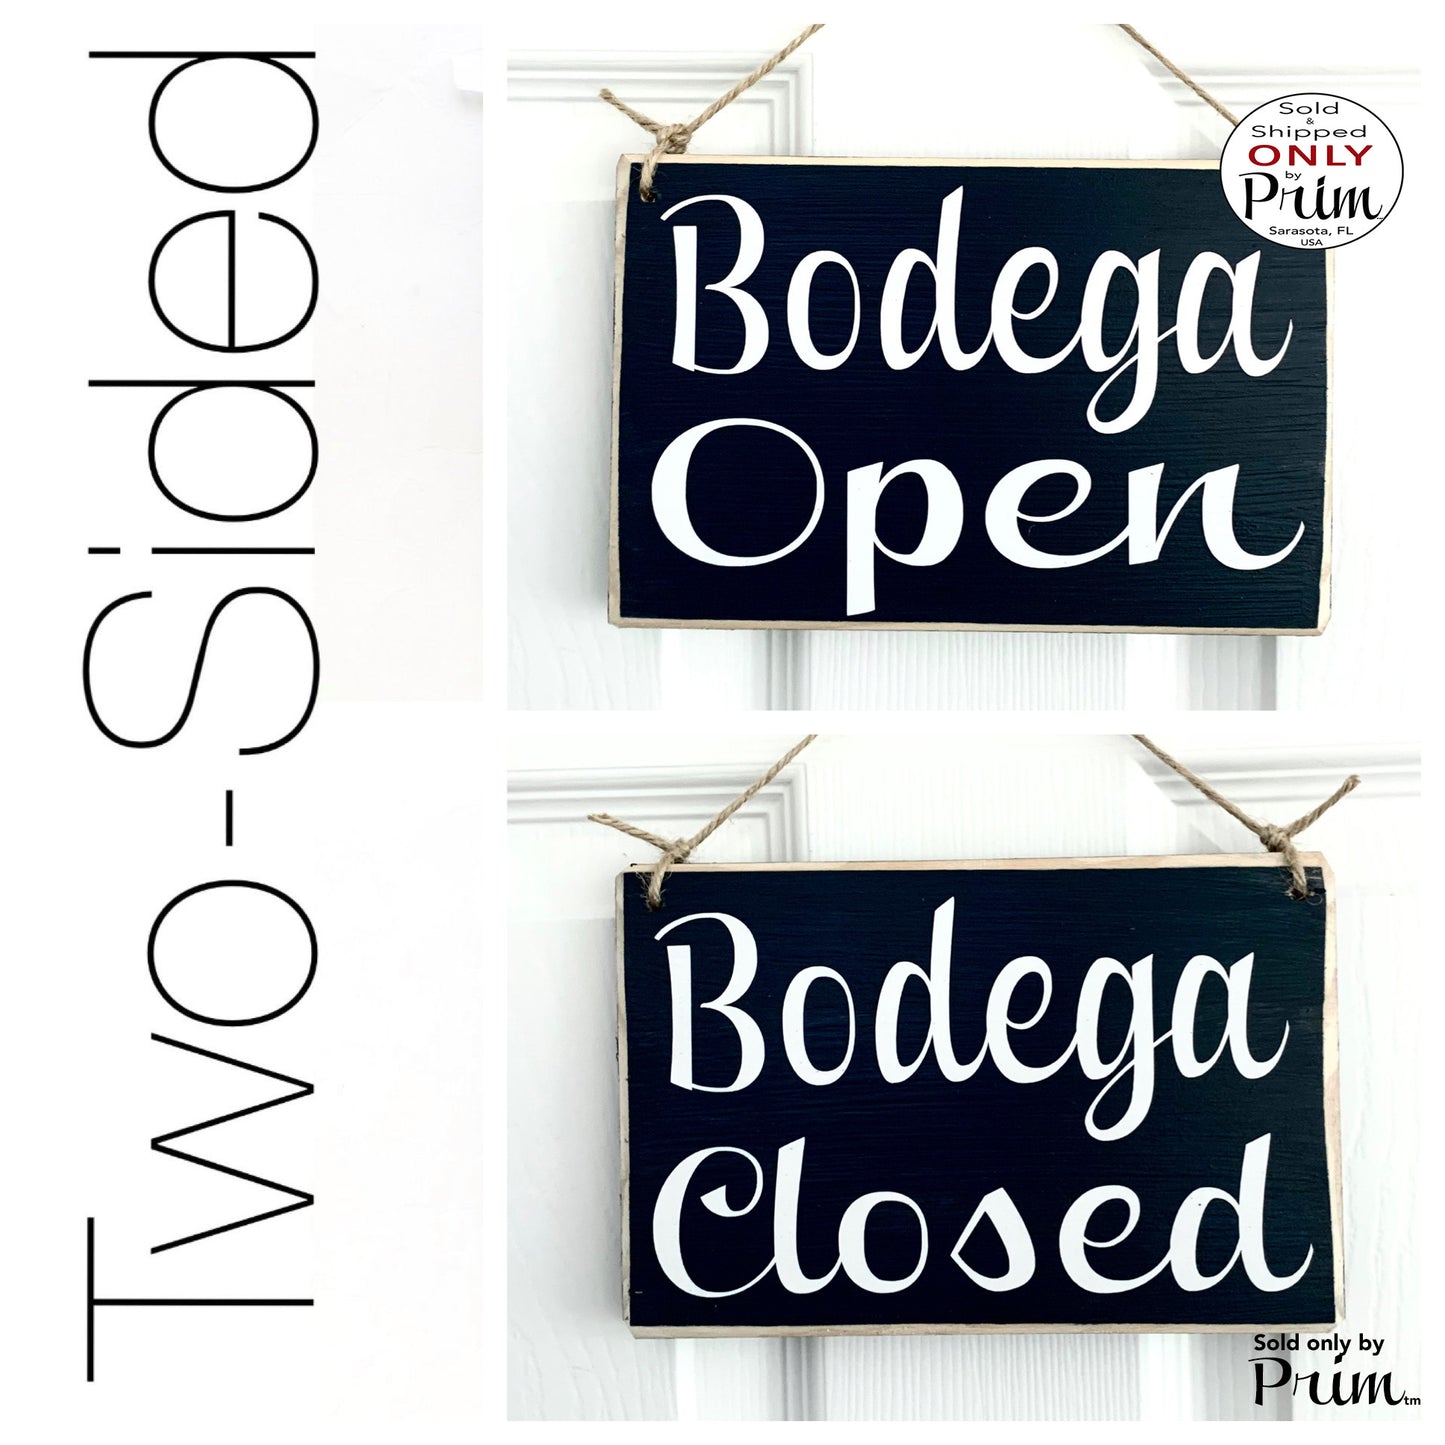 Designs by Prim 8x6 Bodega Open Closed Two Sided Custom Wood Sign Spanish Grocery Store Convenient Store Front Wine Bar Shop Spanish Cellar Door Plaque